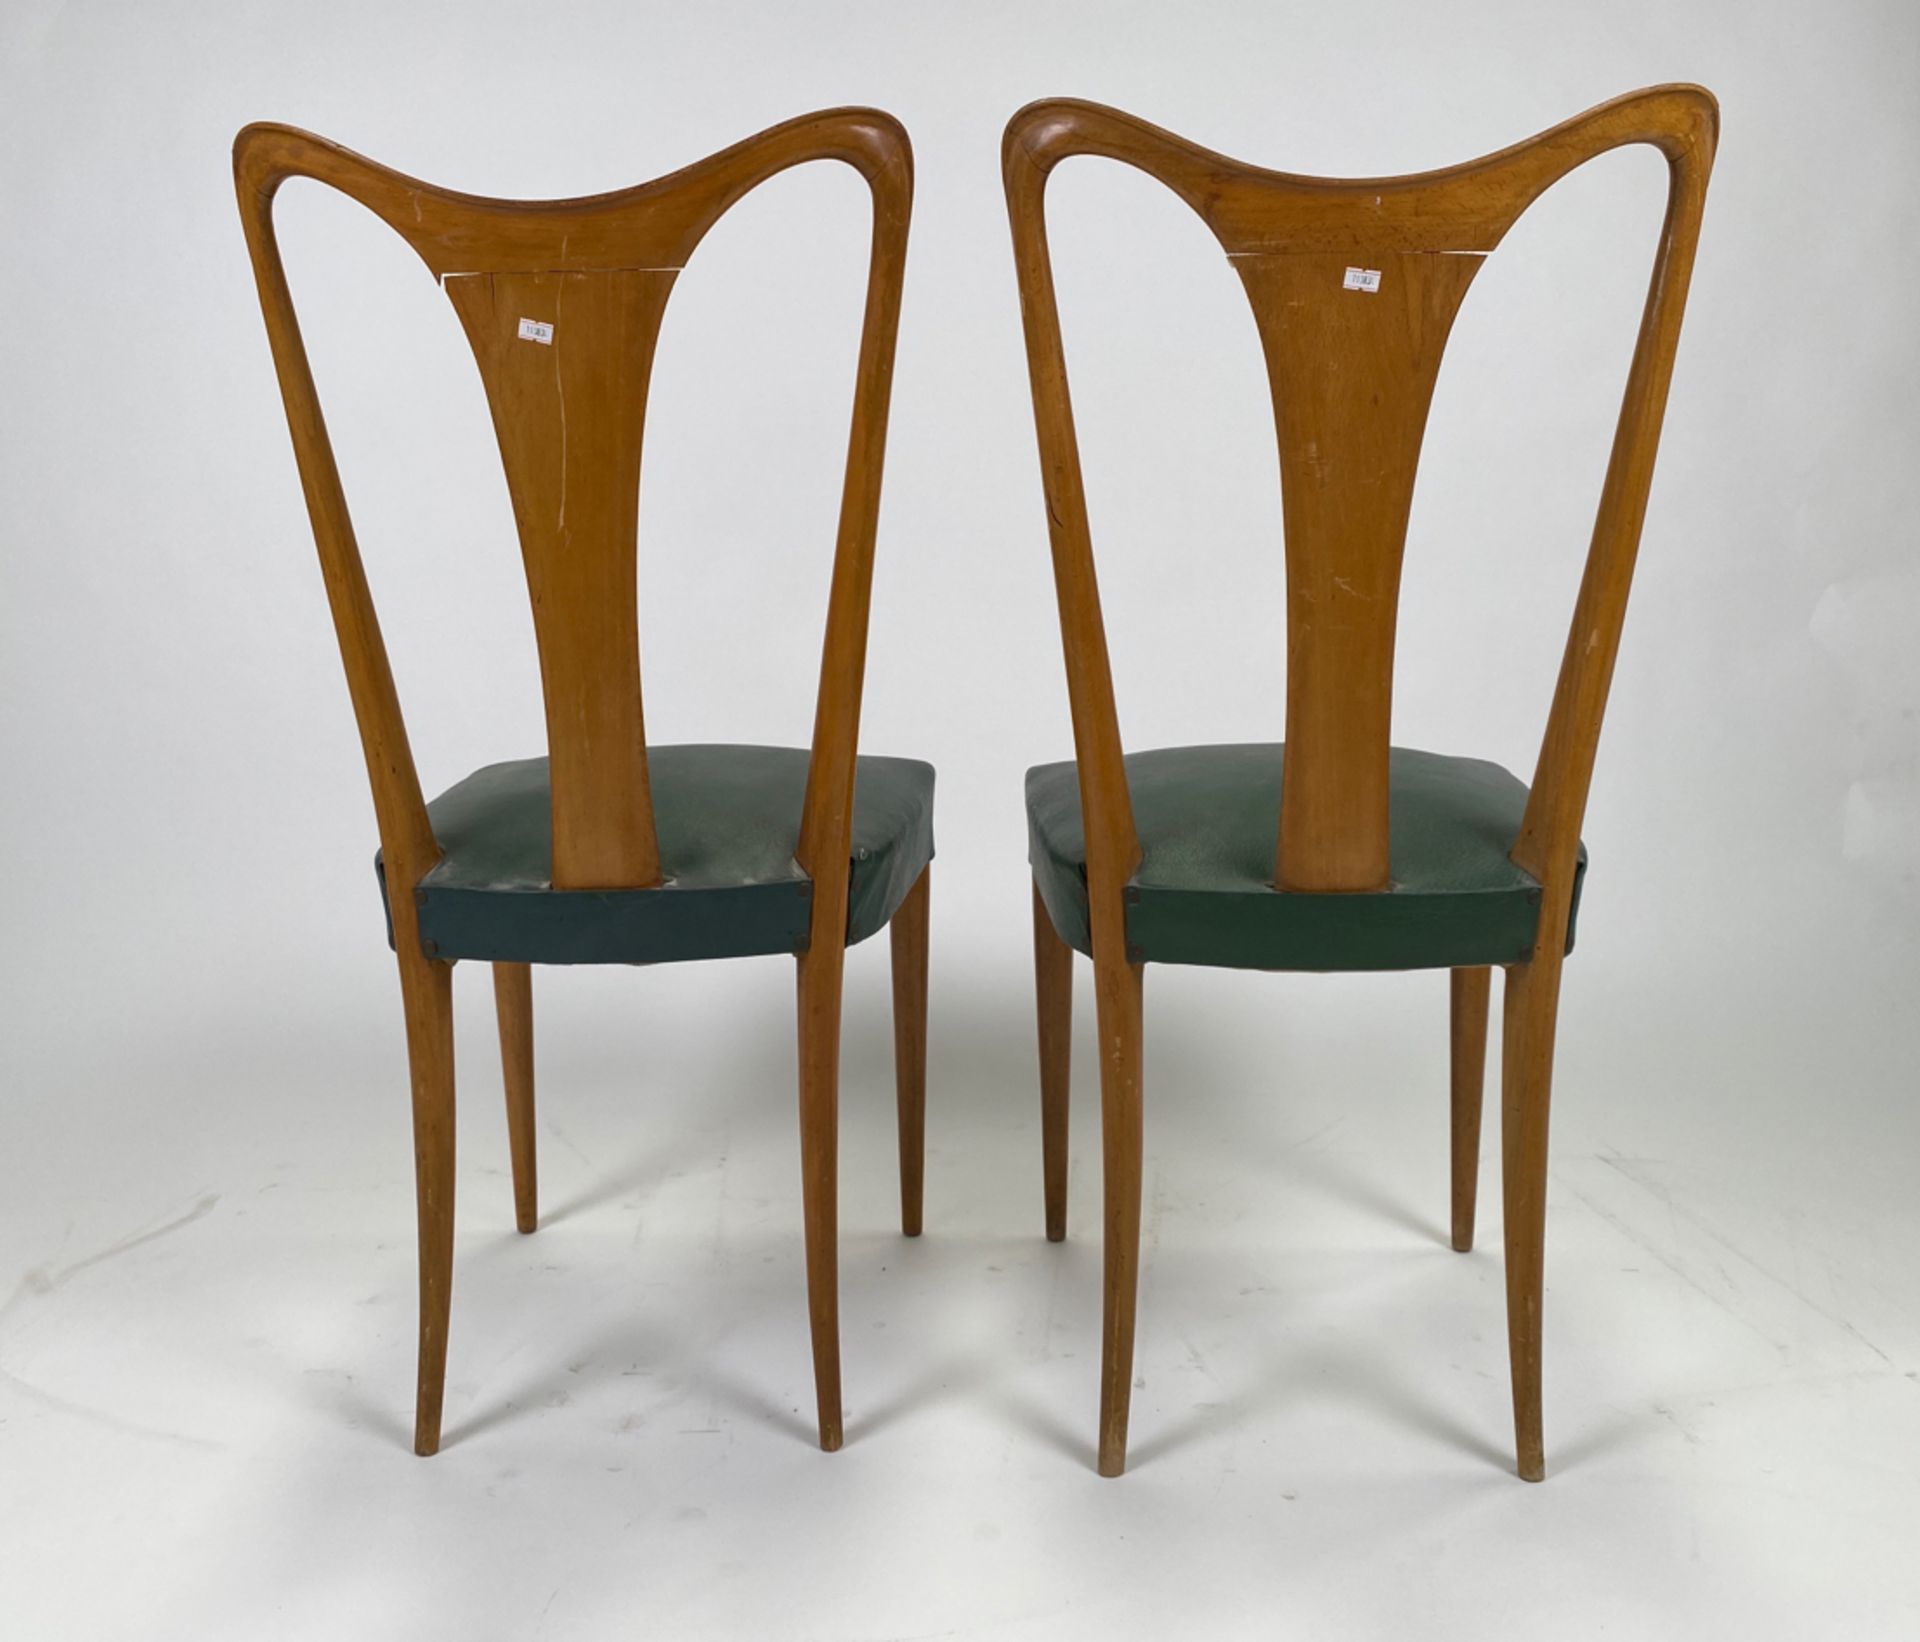 Pair of Ico Parisi Mid-Century Leather Chairs - Image 6 of 8